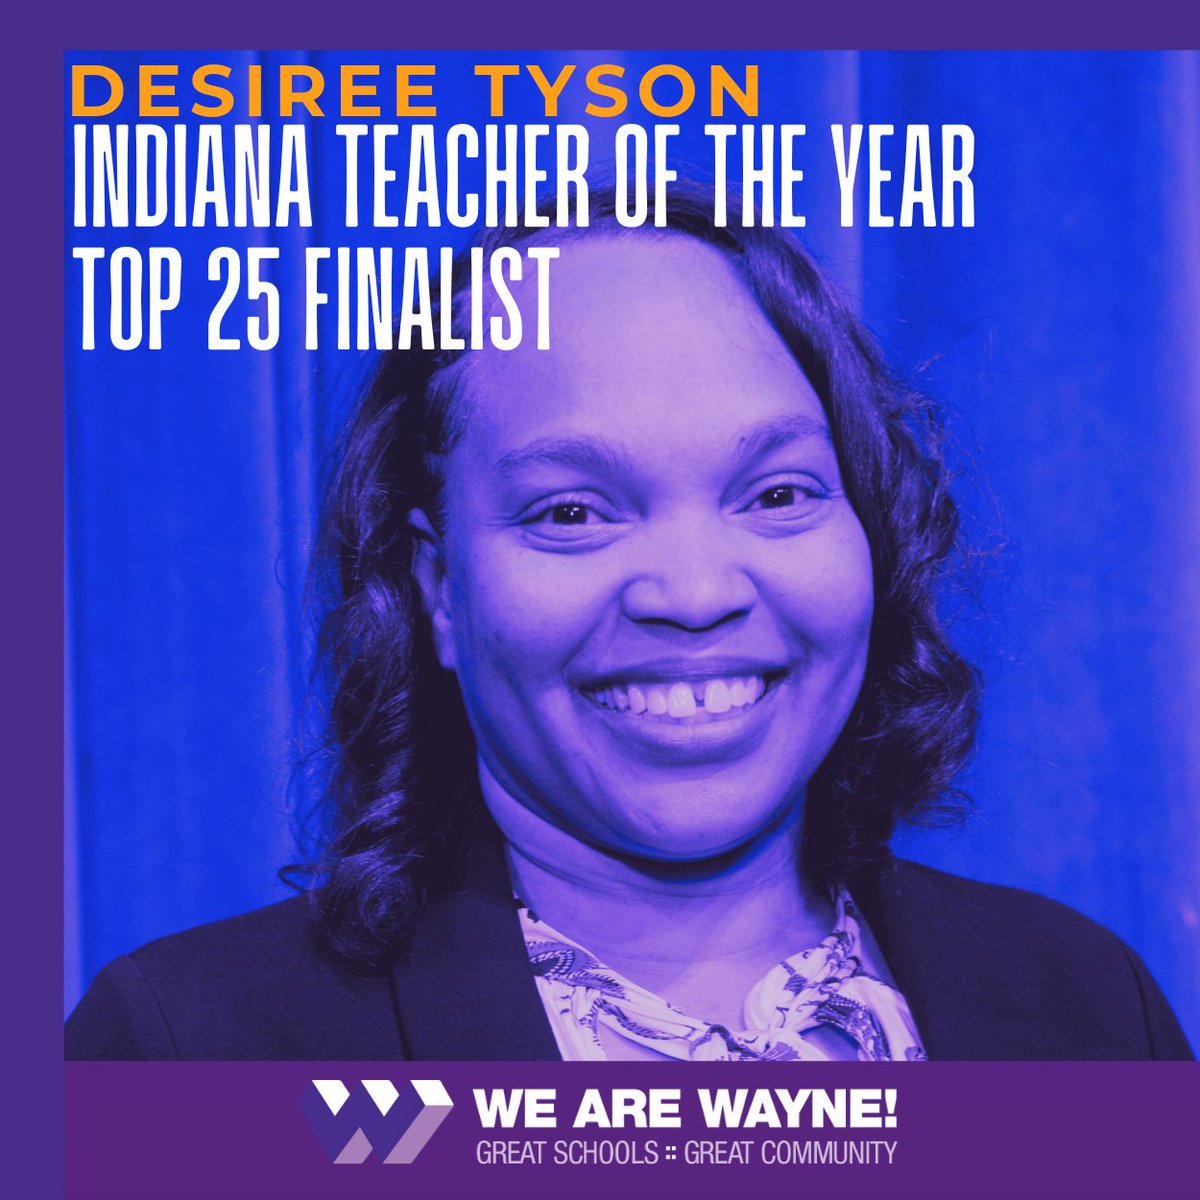 Congrats to Desiree Tyson for being named a Top 25 Finalist for Indiana Teacher of the Year! As a first-grade teacher at @wle_elem1955, Ms. Tyson is a reflective practitioner who commits to building her capacity every day to benefit students! #WeAreWayne @WayneTwpSuper